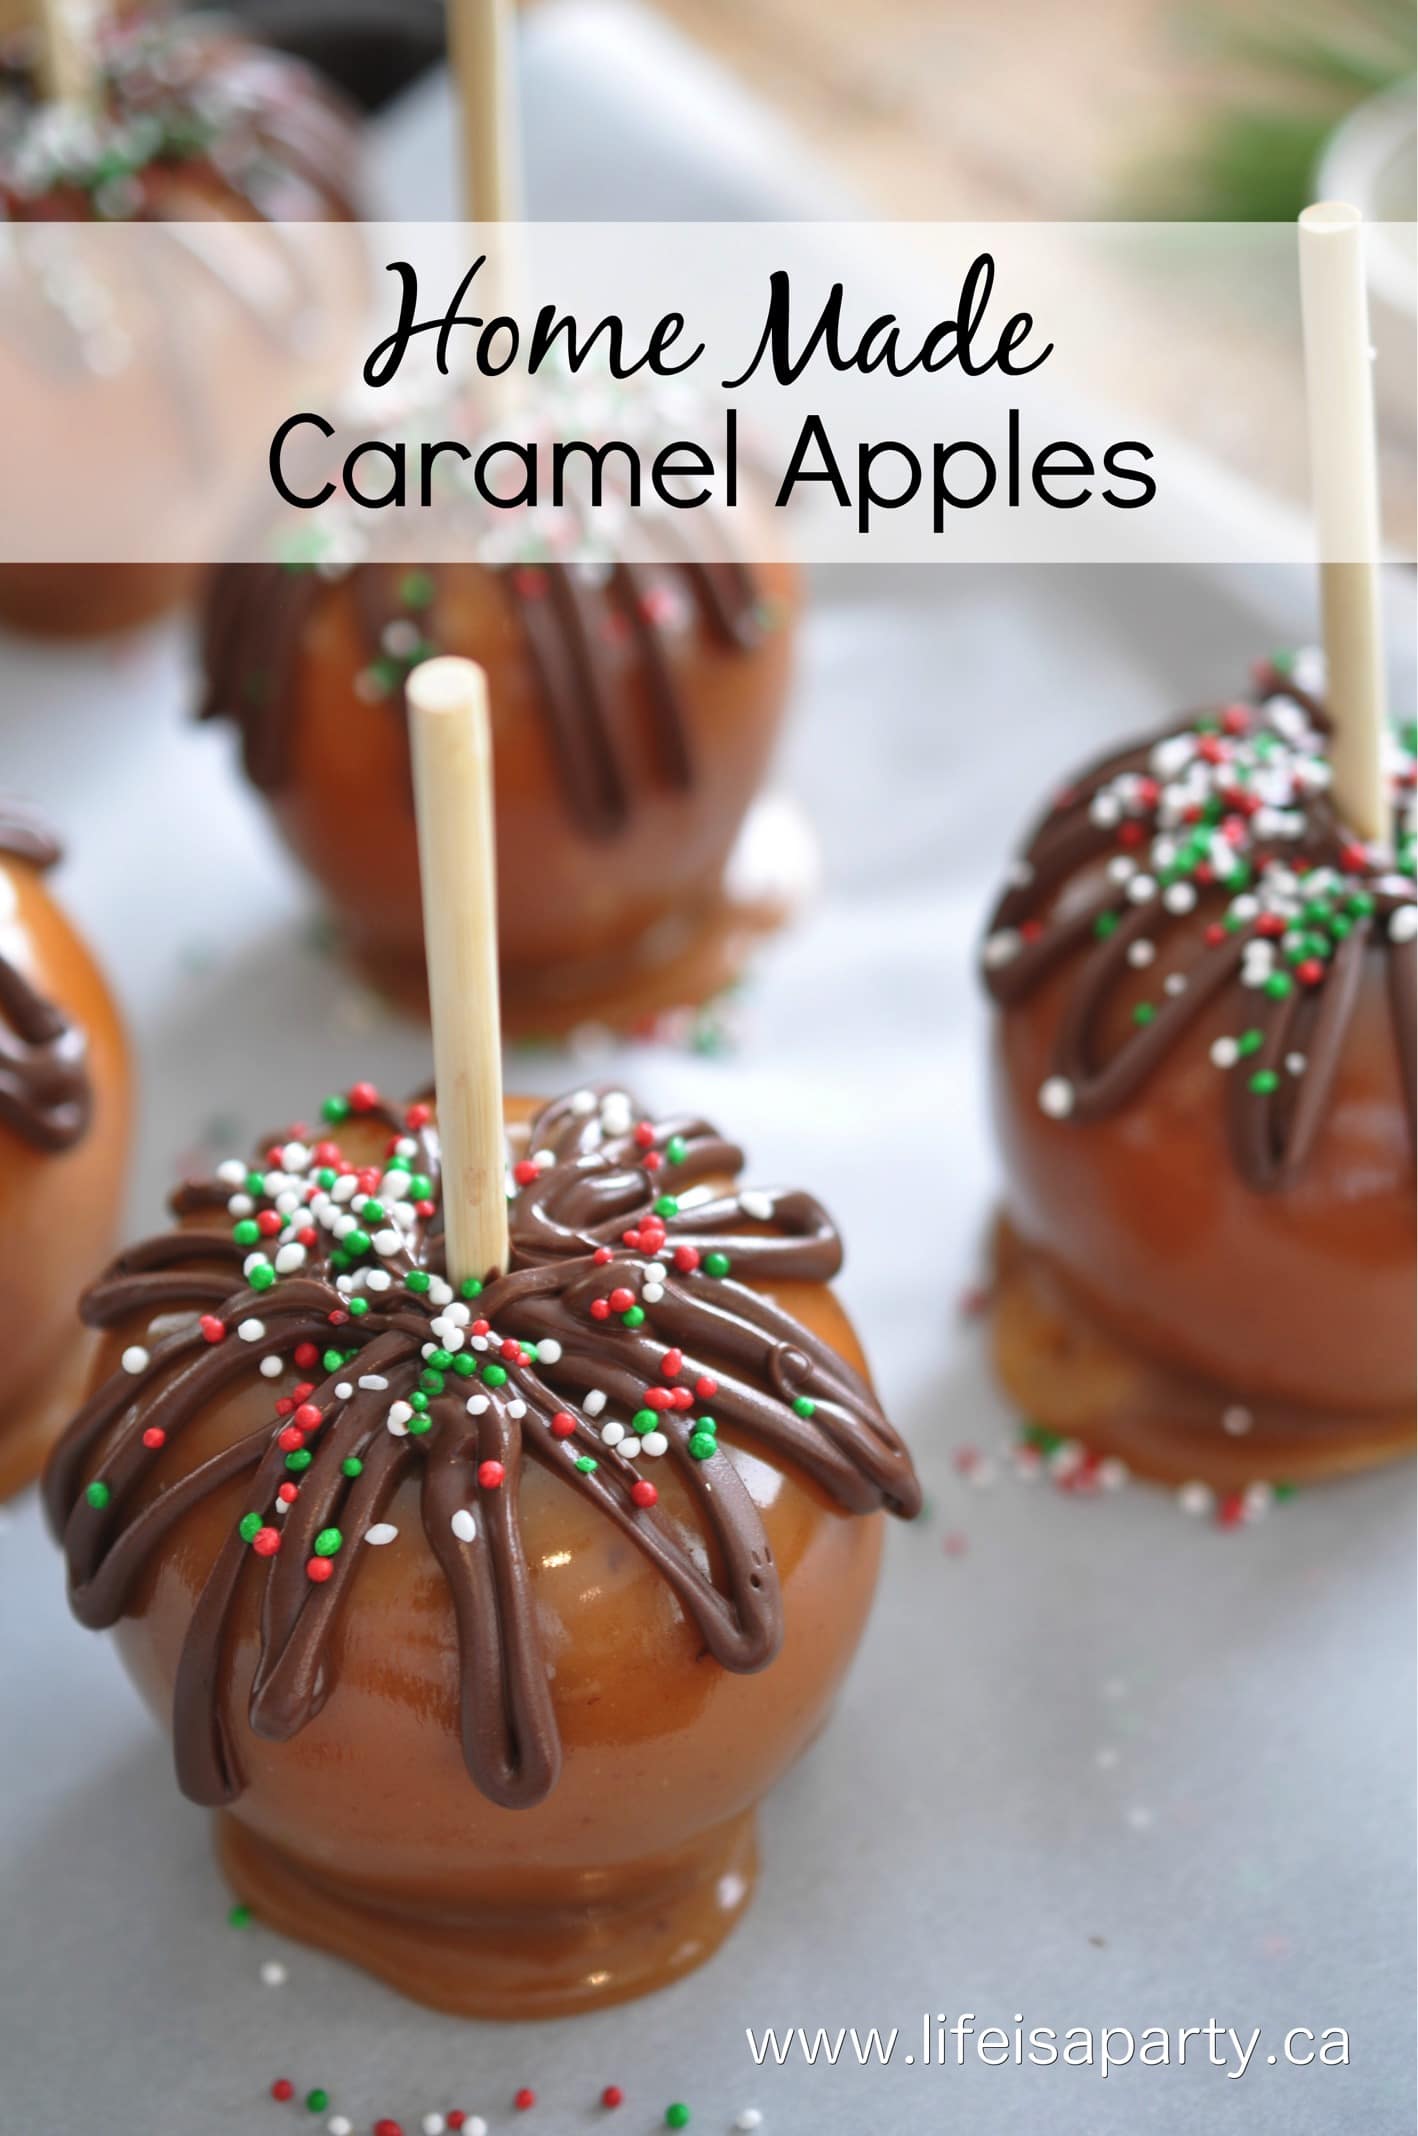 Home Made Caramel Apple Recipe: Easy, made from scratch Caramel Apples, perfect for Christmas gift giving.